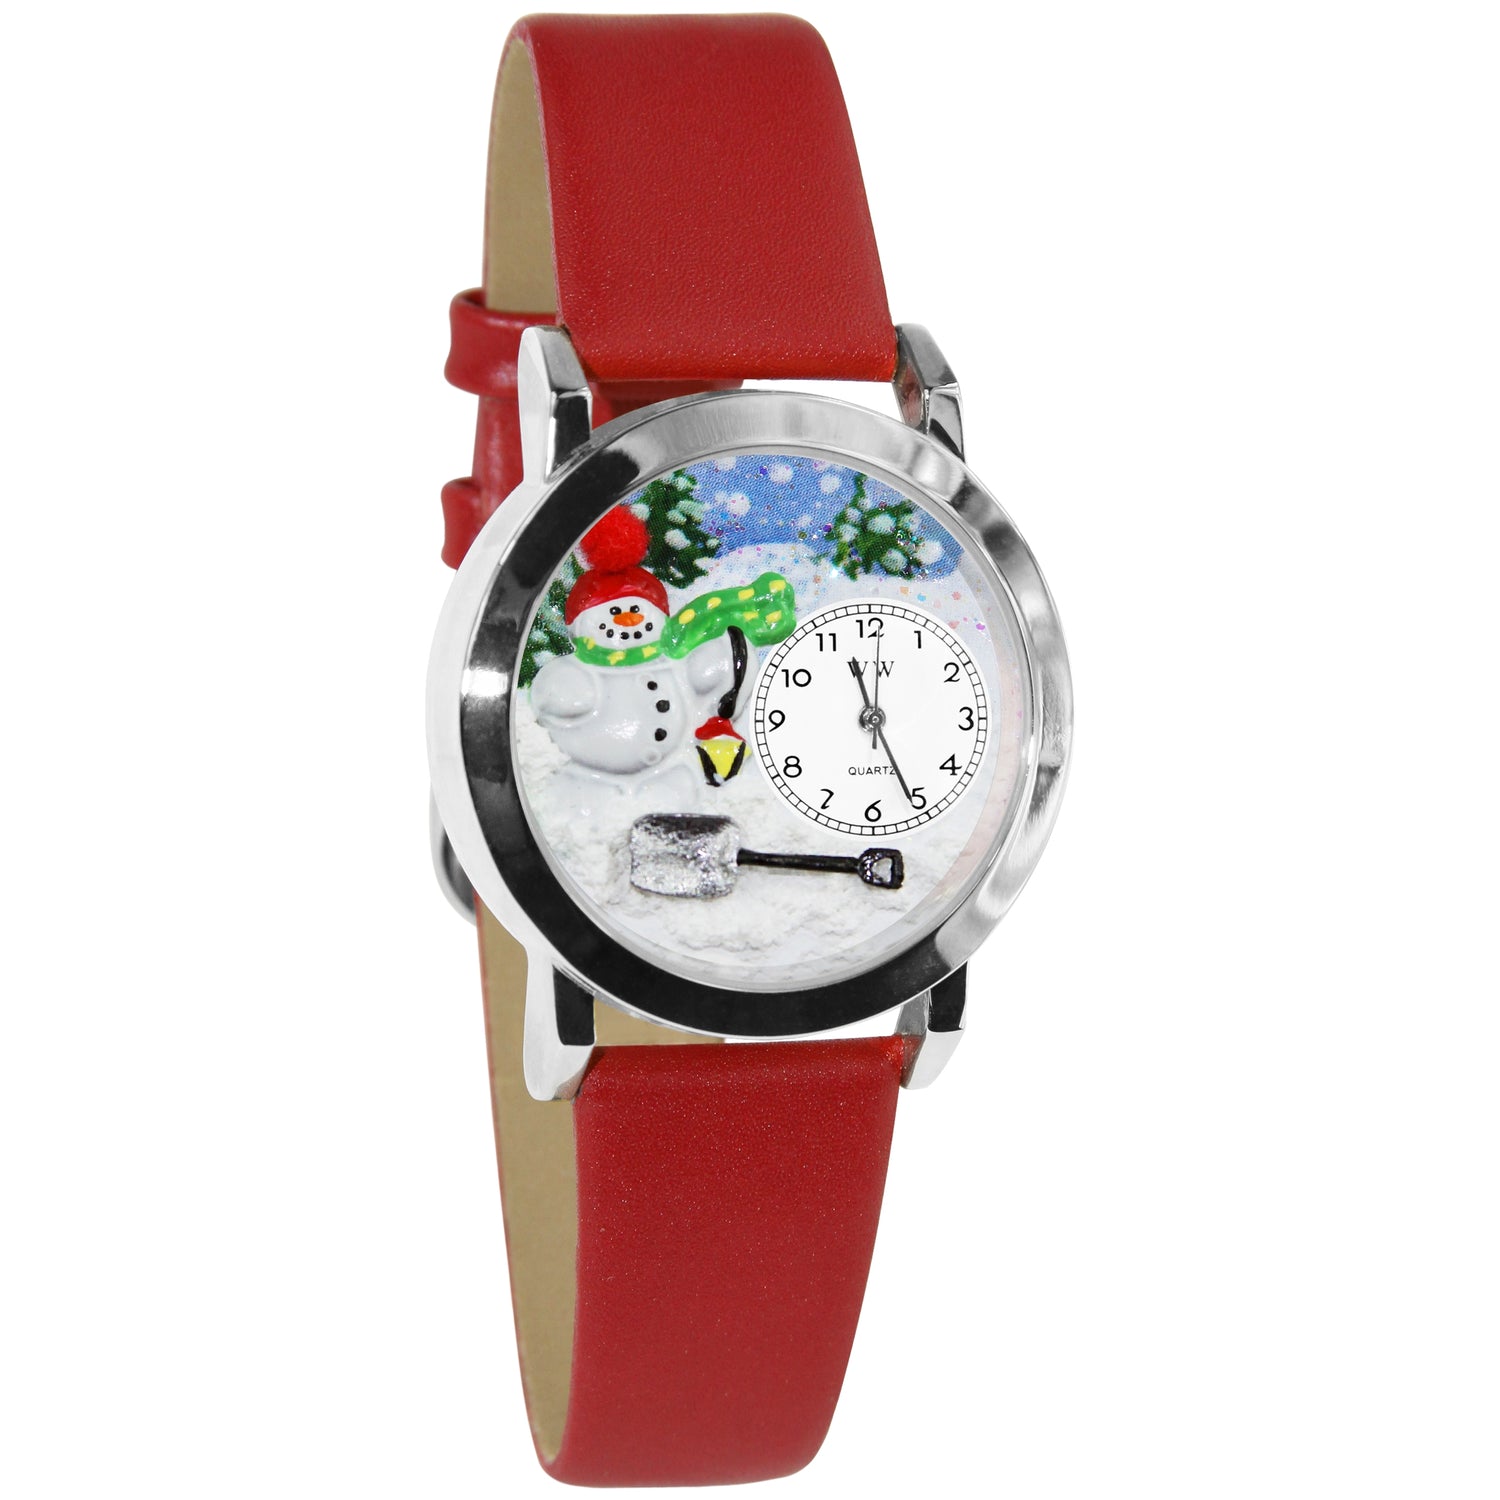 Whimsical Gifts | Snowman 3D Watch Small Style | Handmade in USA | Holiday & Seasonal Themed | Fall & Winter | Novelty Unique Fun Miniatures Gift | Silver Finish Red Leather Watch Band